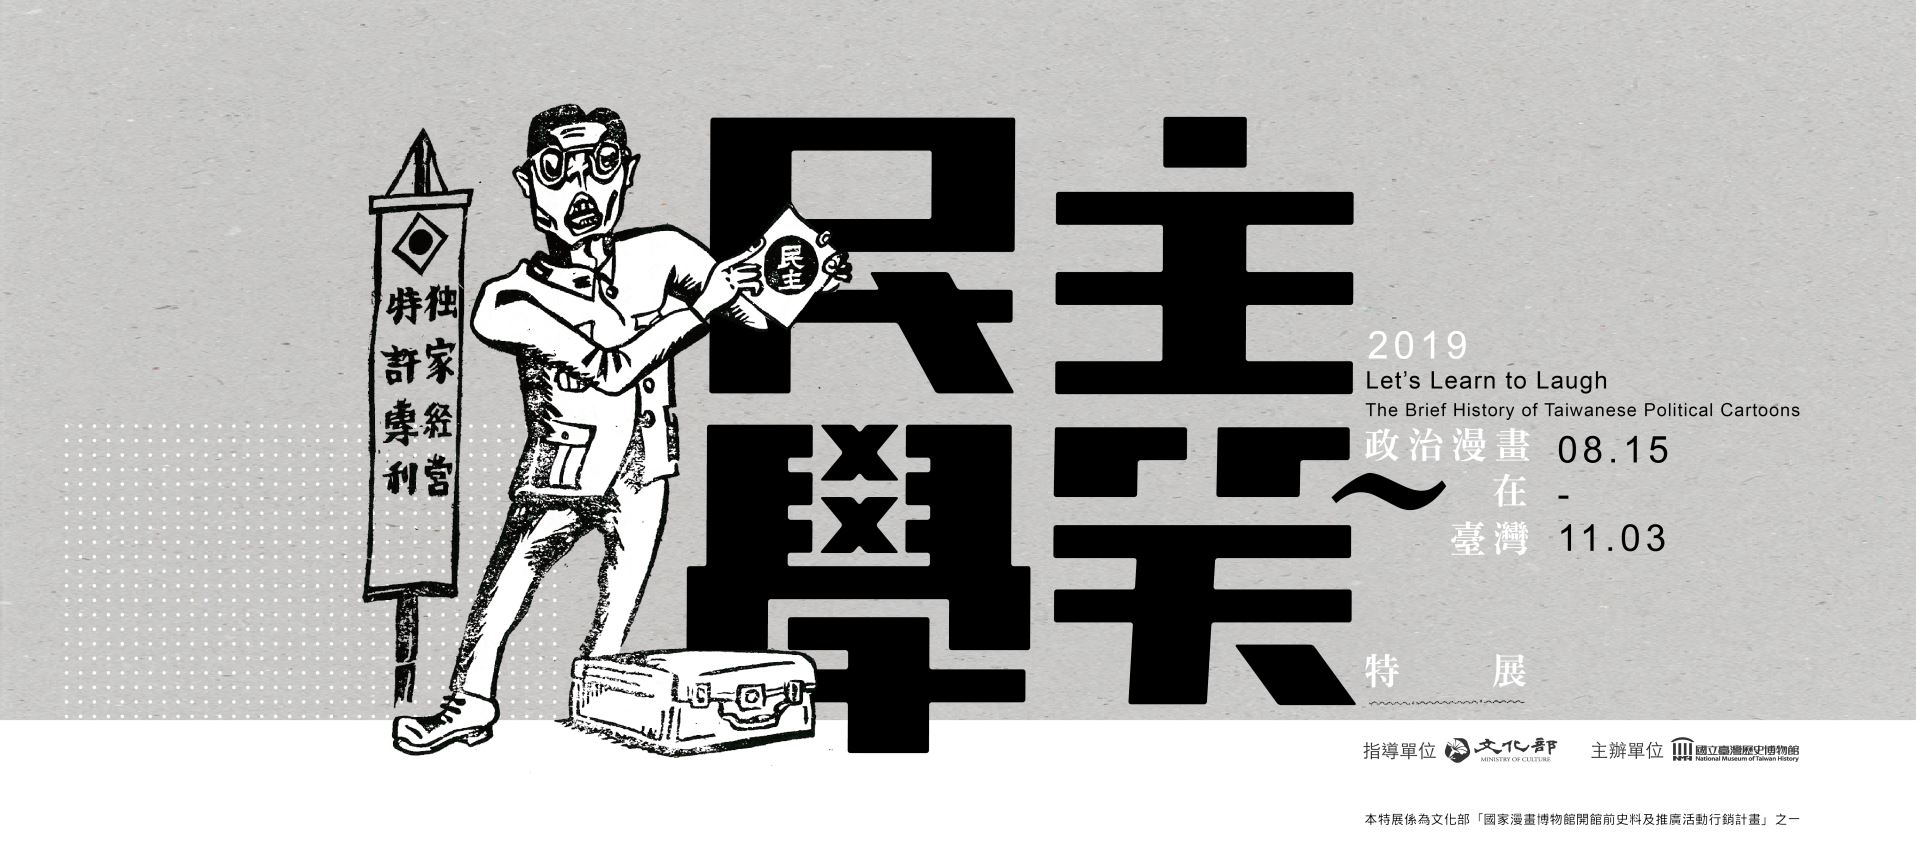 ‘Let’s Learn to Laugh: The Brief History of Taiwanese Political Cartoons’